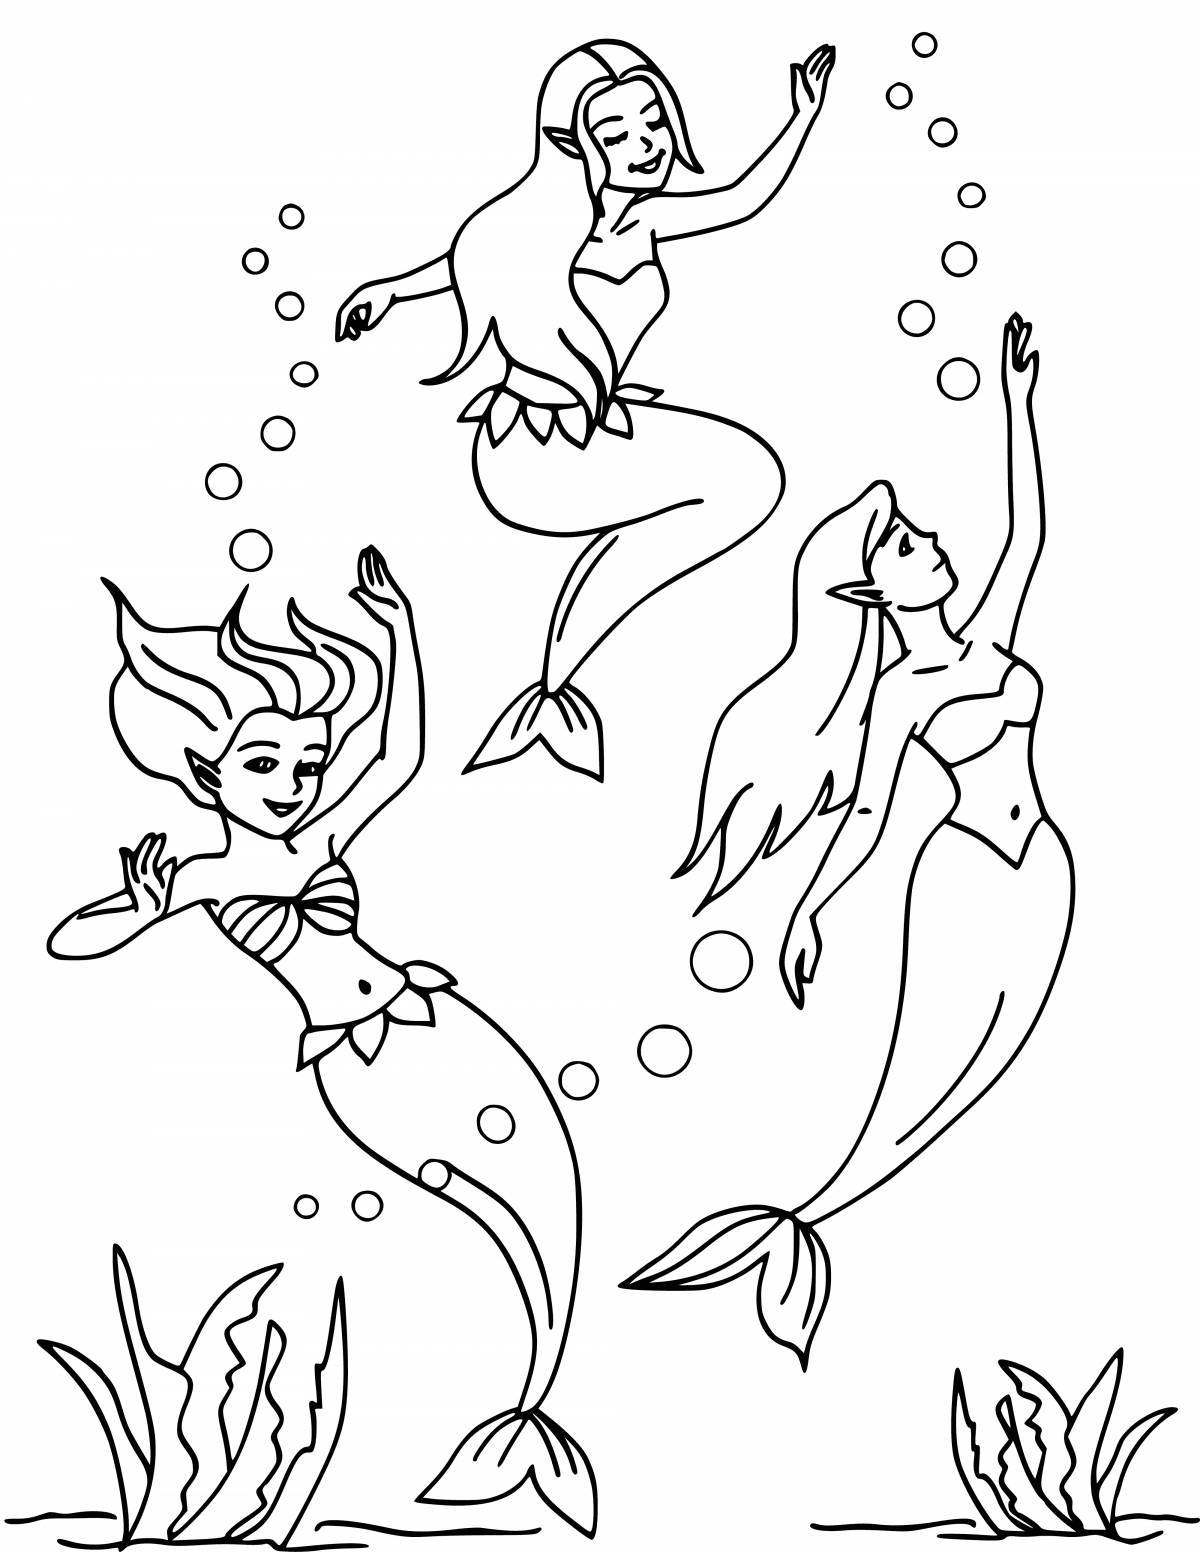 Dazzling mermaid coloring book for kids